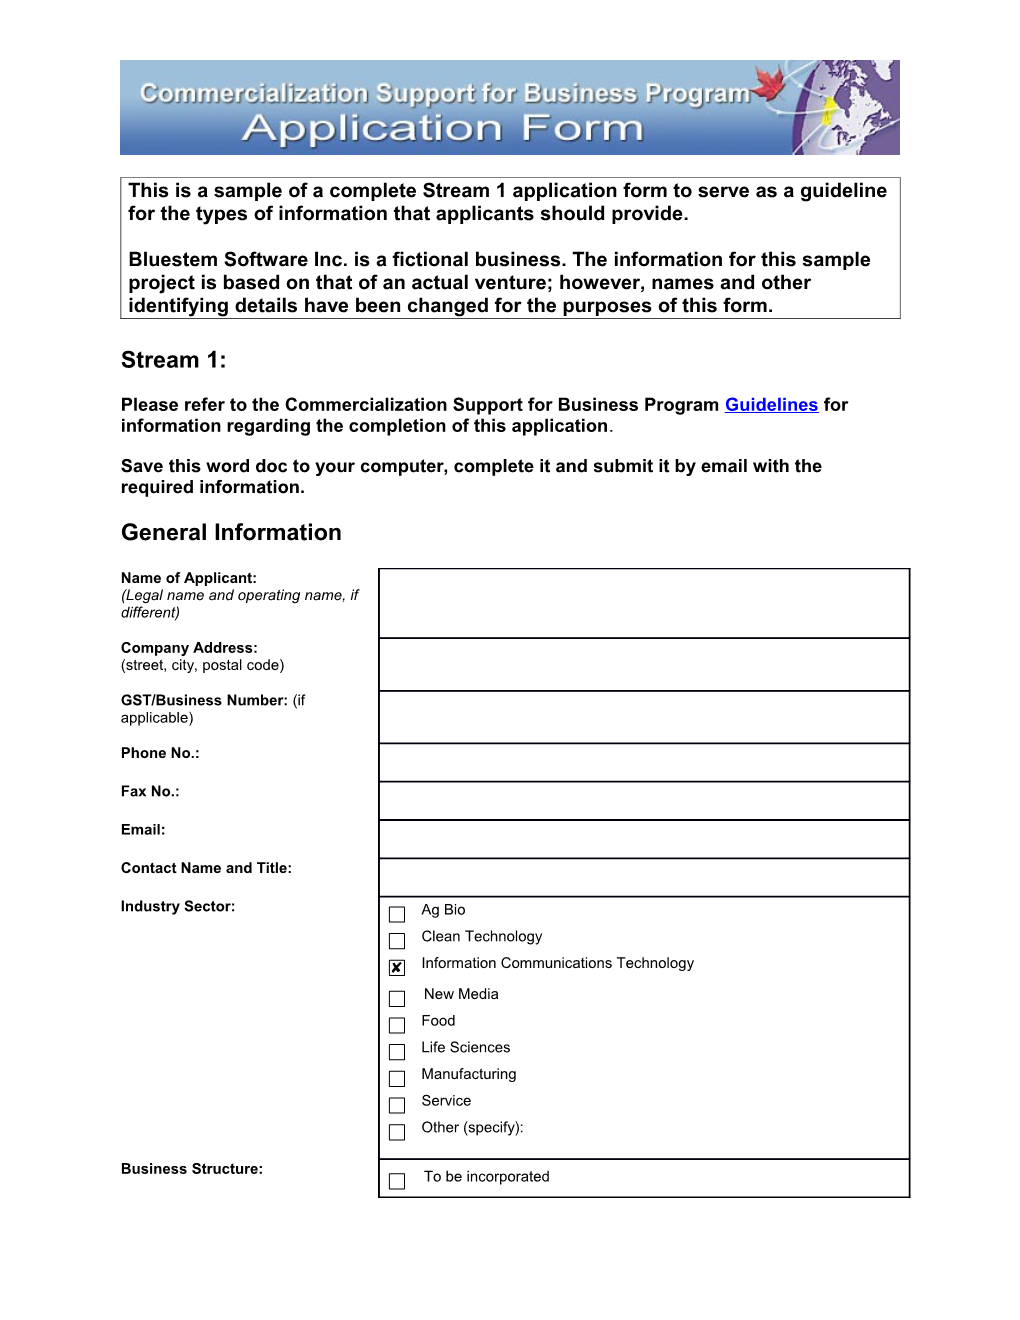 This Is a Sample of a Complete Stream 1 Application Form to Serve As a Guideline for The